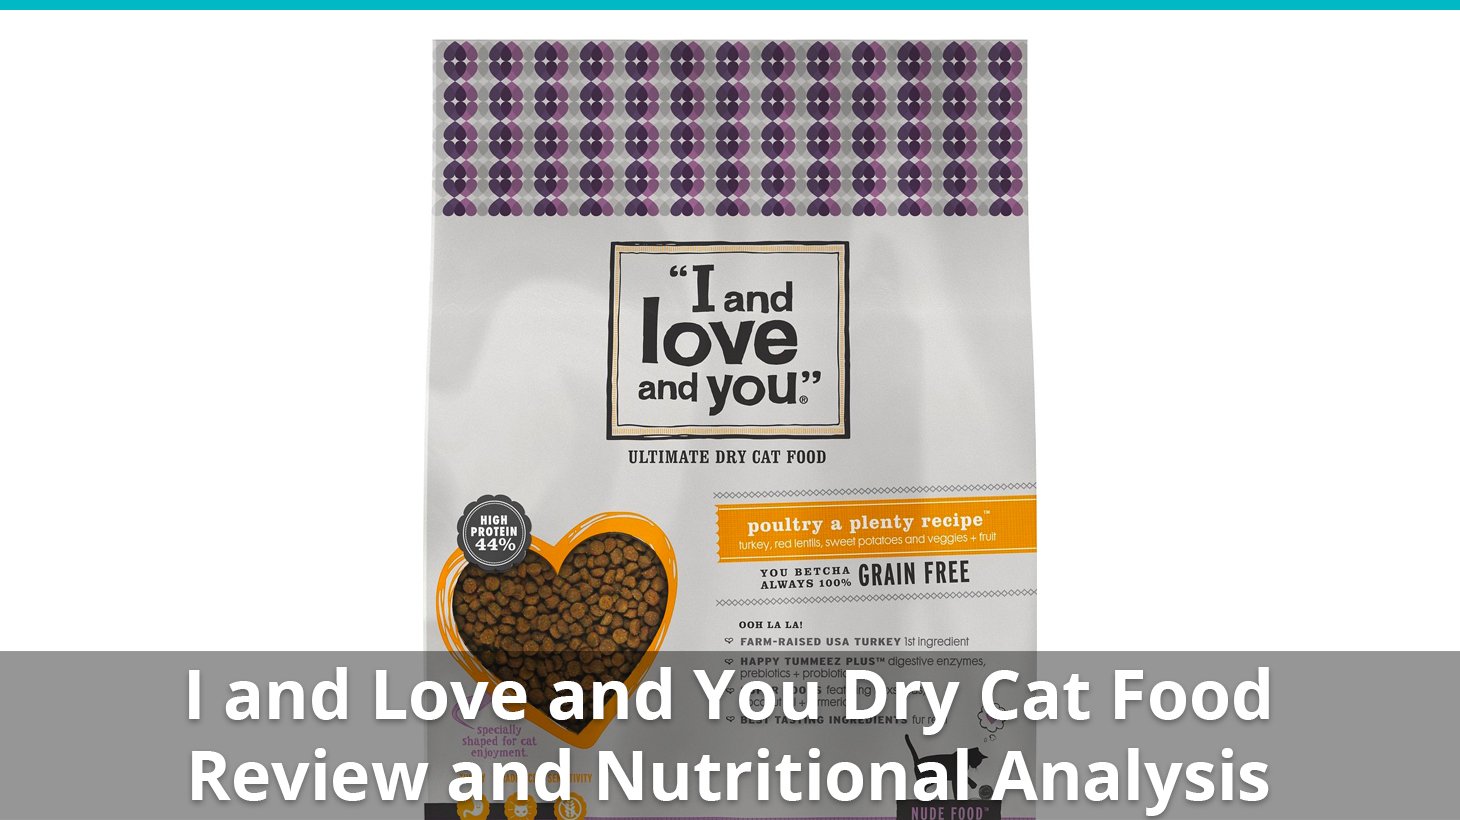 I and Love and You Cat Food (Dry) Review And Nutritional Analysis